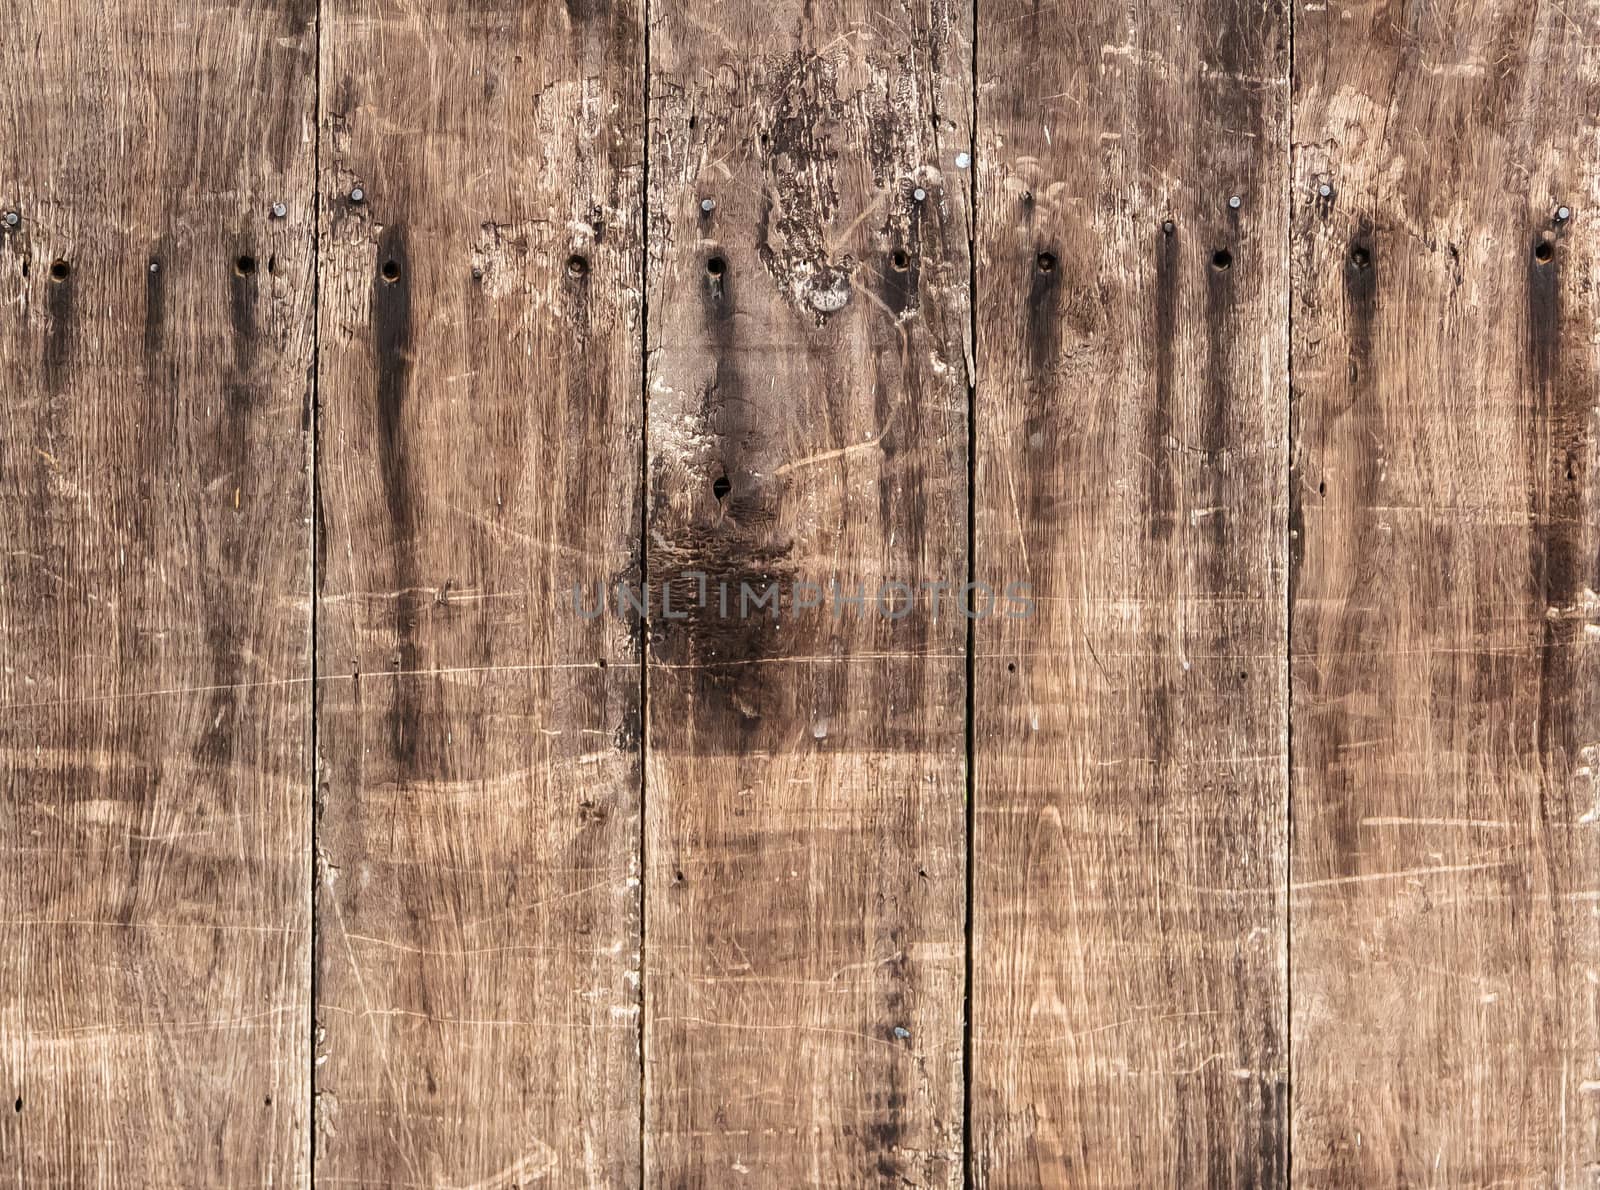 Weathered Wood Texture Background in Vertical pattern by punpleng